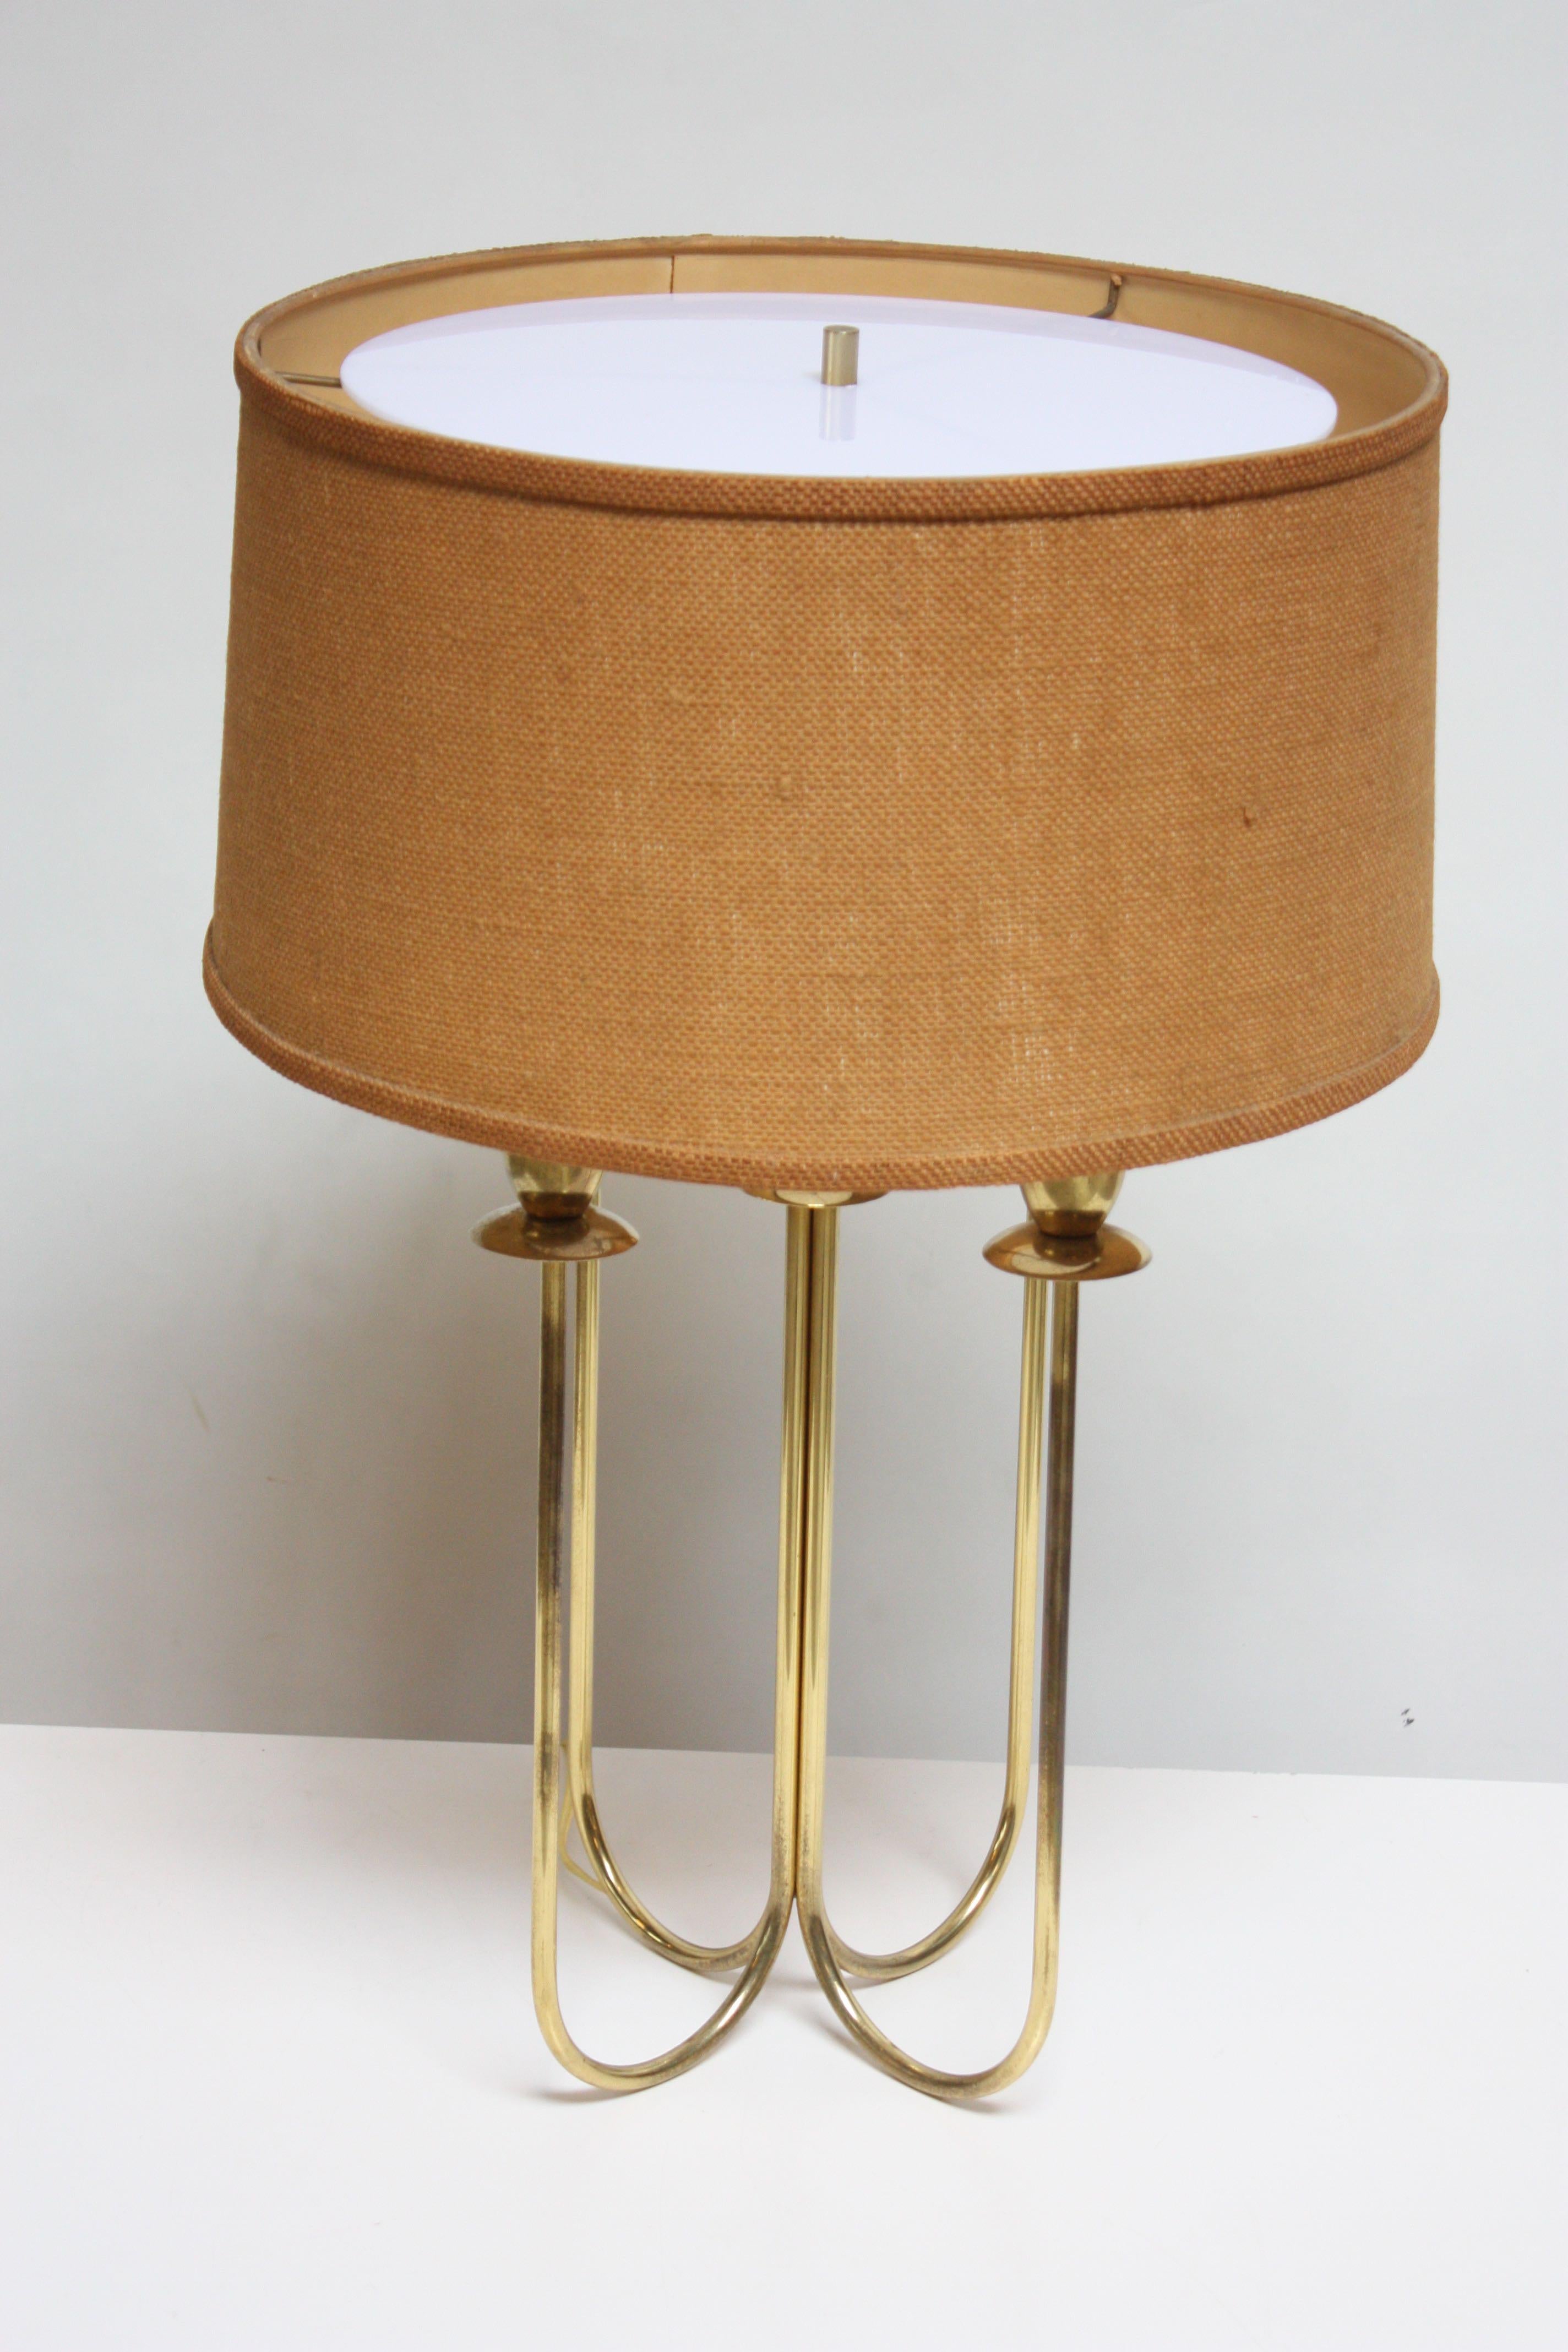 Mid-century brass table lamp composed of four-fixtures and corresponding 'tapers' that intersect at a central stem. Paired with a beige woven-linen shade and newly fabricated acrylic diffuser for even light distribution. Brass has been left